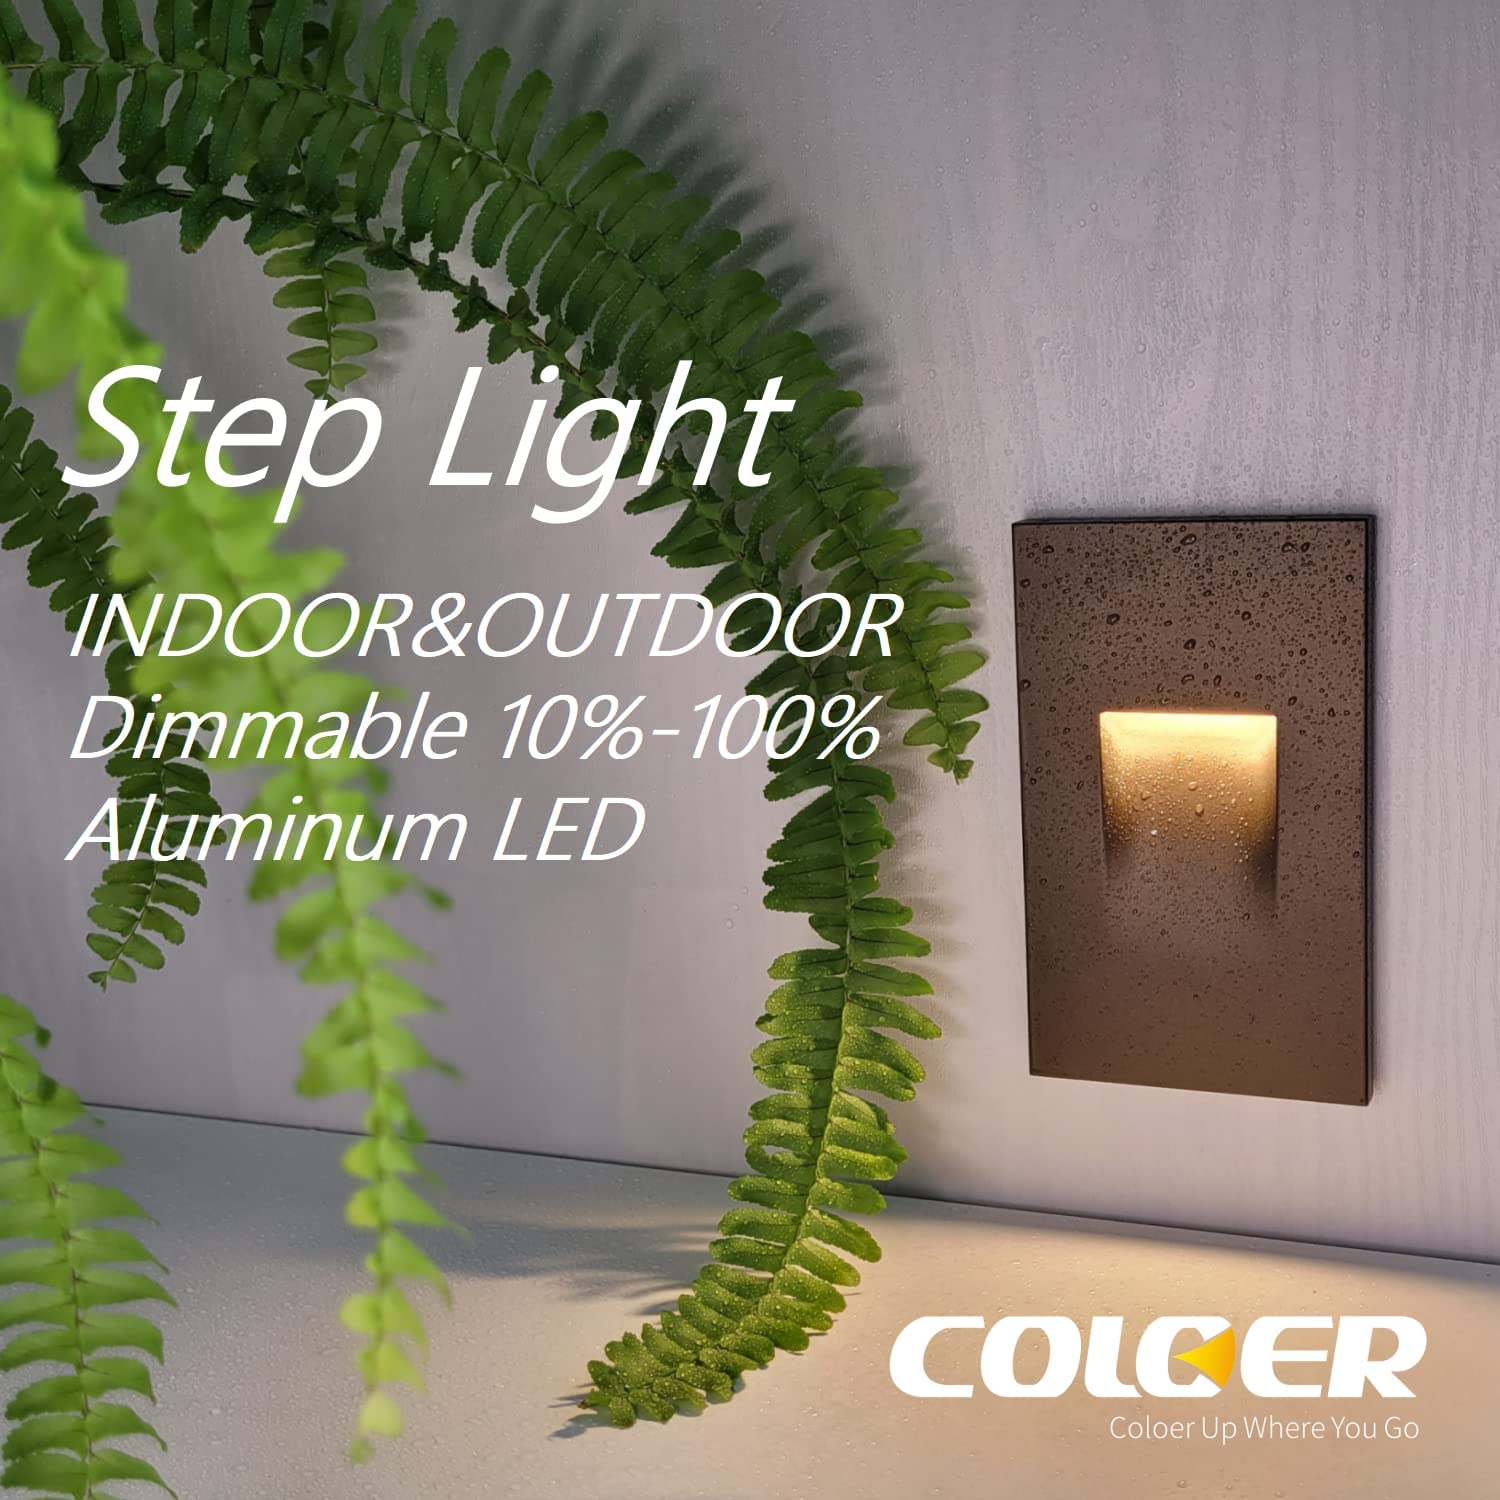 COLOER 3.5W LED aluminum step light with oil-rubbed bronze finish installed on wall, emitting warm white light. Text: 'Step Light,' 'INDOOR&OUTDOOR,' 'Dimmable 10%-100%', 'Aluminum LED'. Fern leaf in foreground, COLOER logo and tagline 'Color Up Where You Go'.